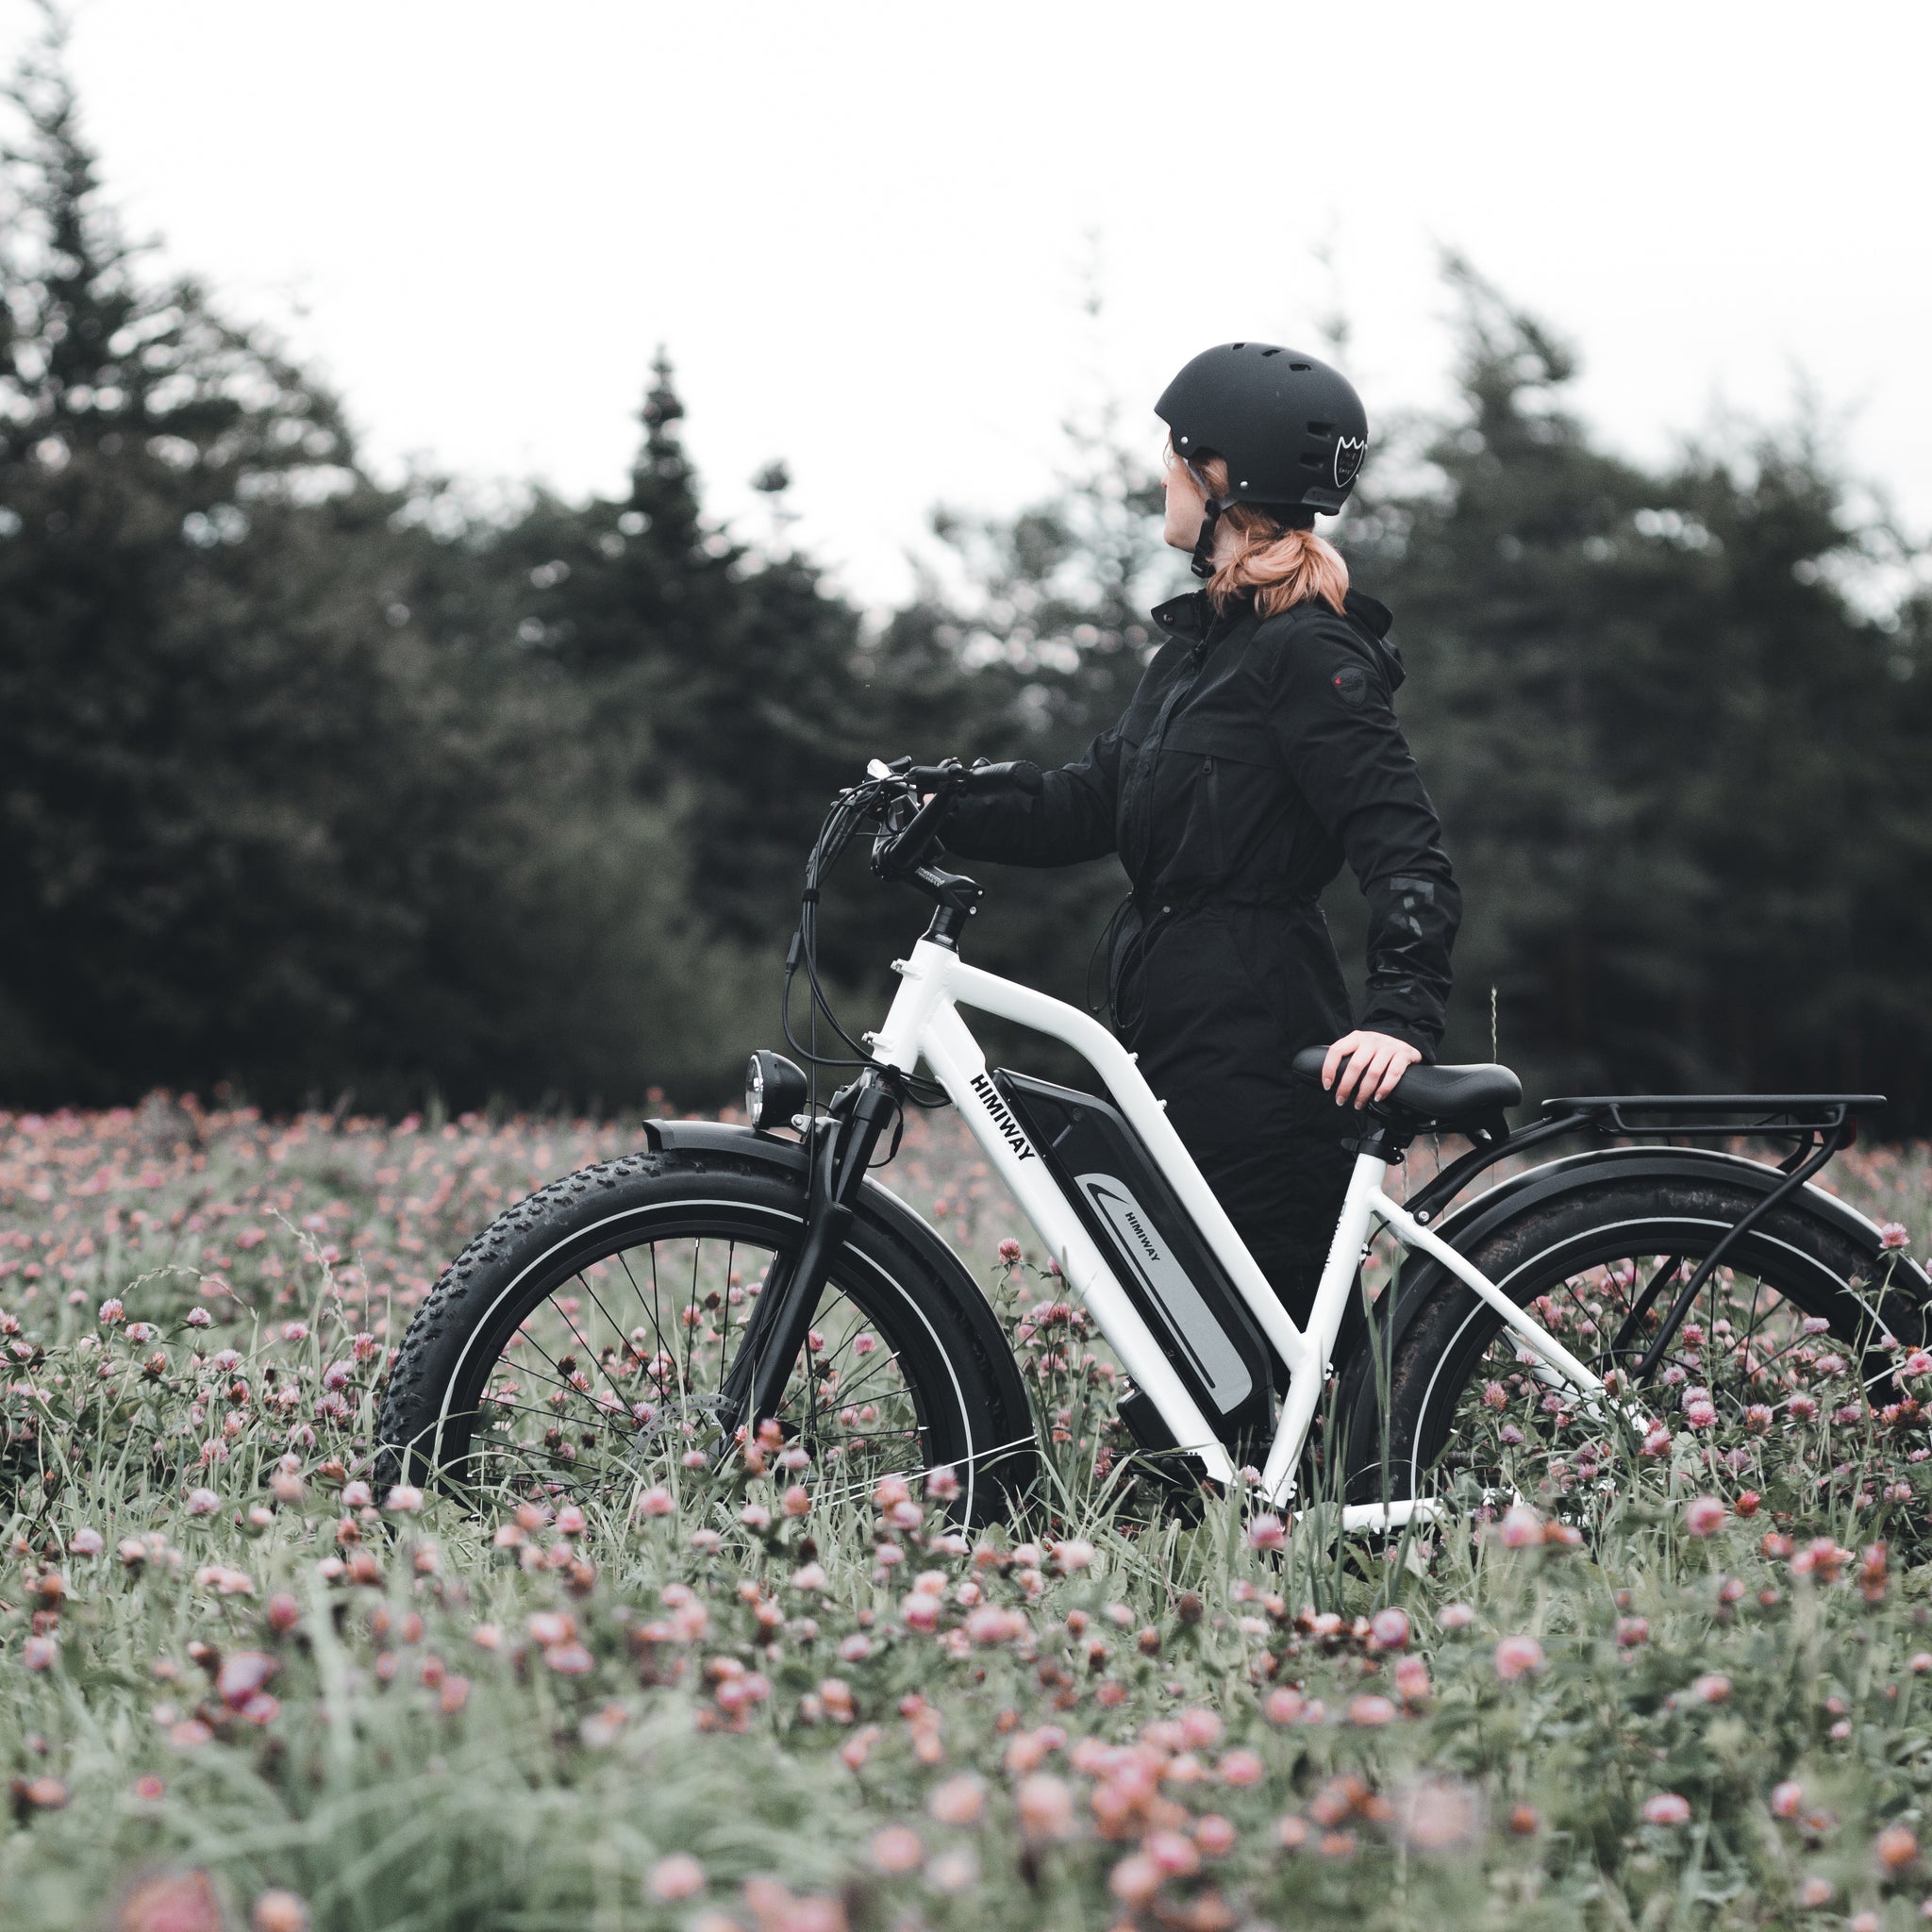 Why ebikes are so expensive